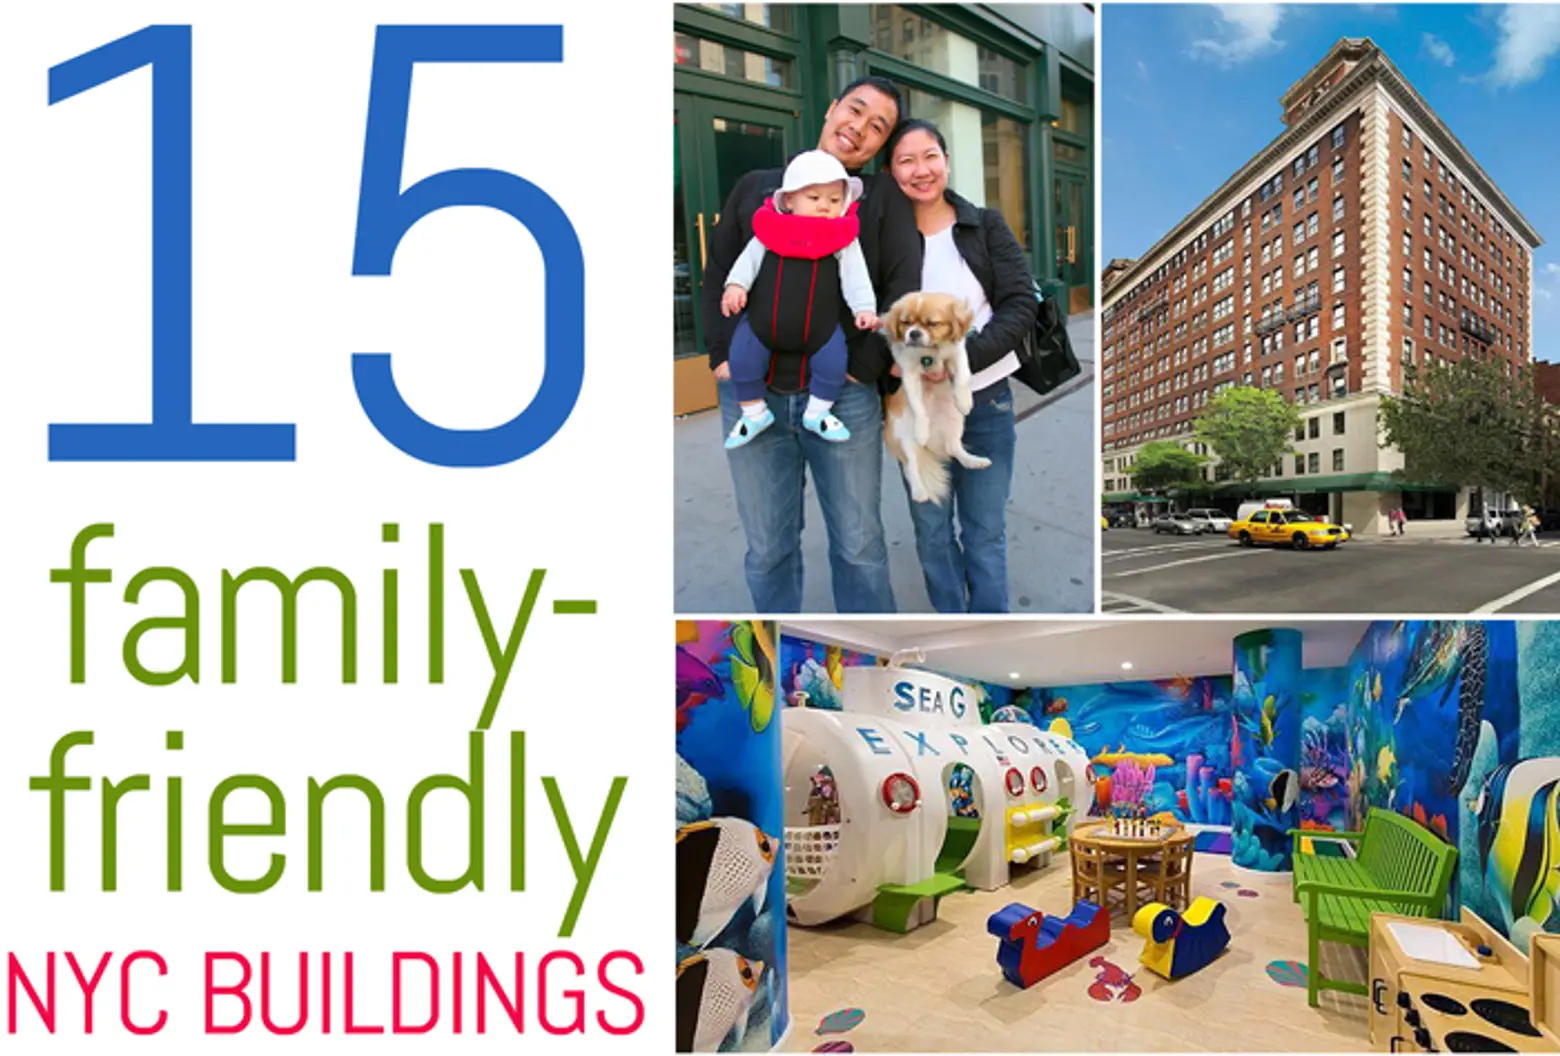 <b>The Top 15 Family-Friendly Buildings in NYC</b>